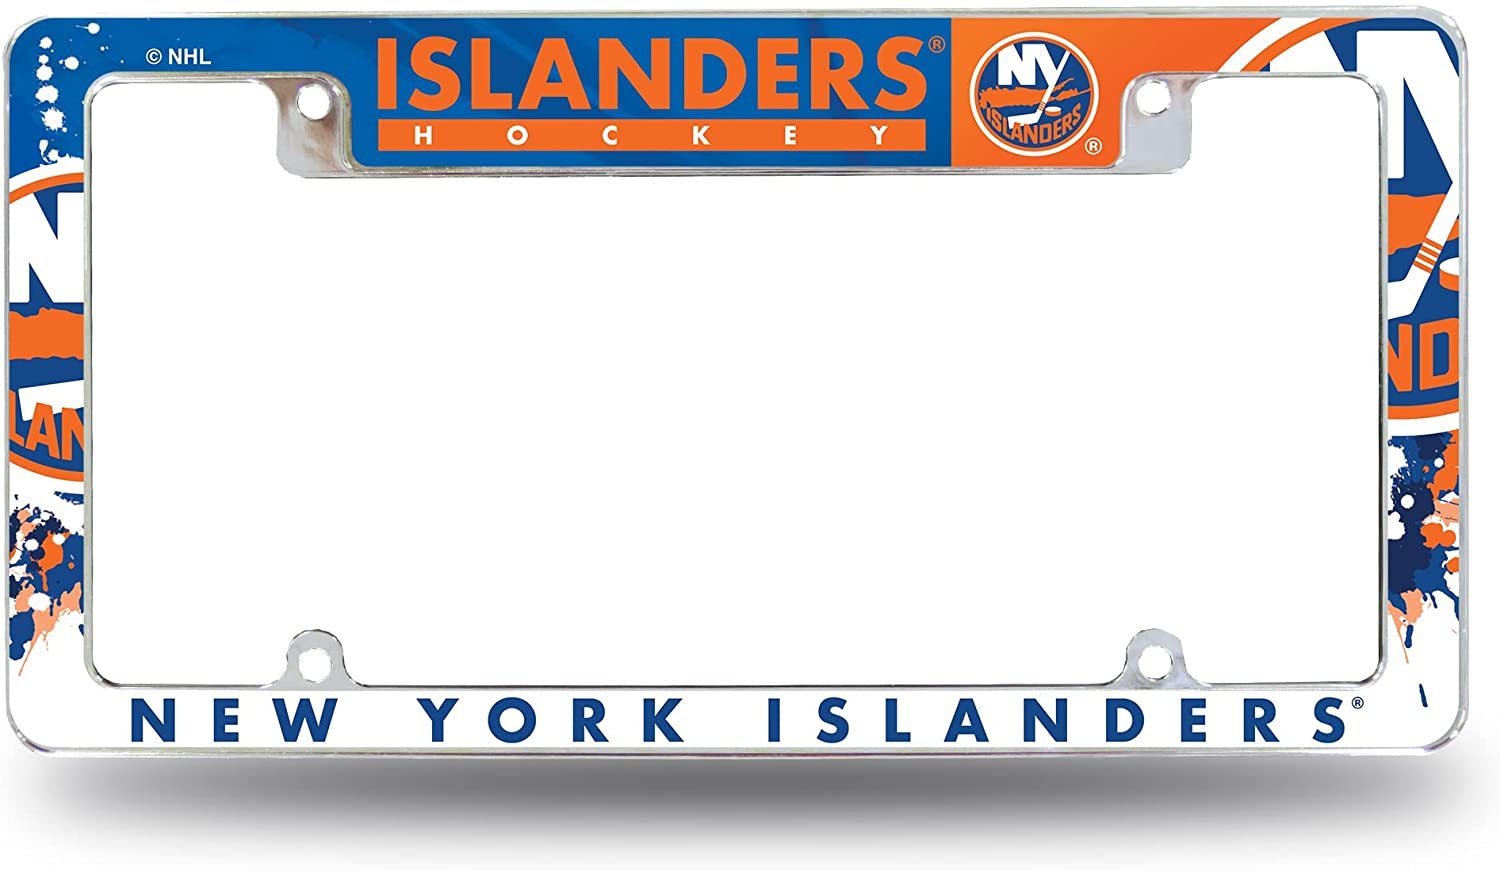 New York Islanders Metal License Plate Frame Chrome Tag Cover, All Over Design, 12x6 Inch